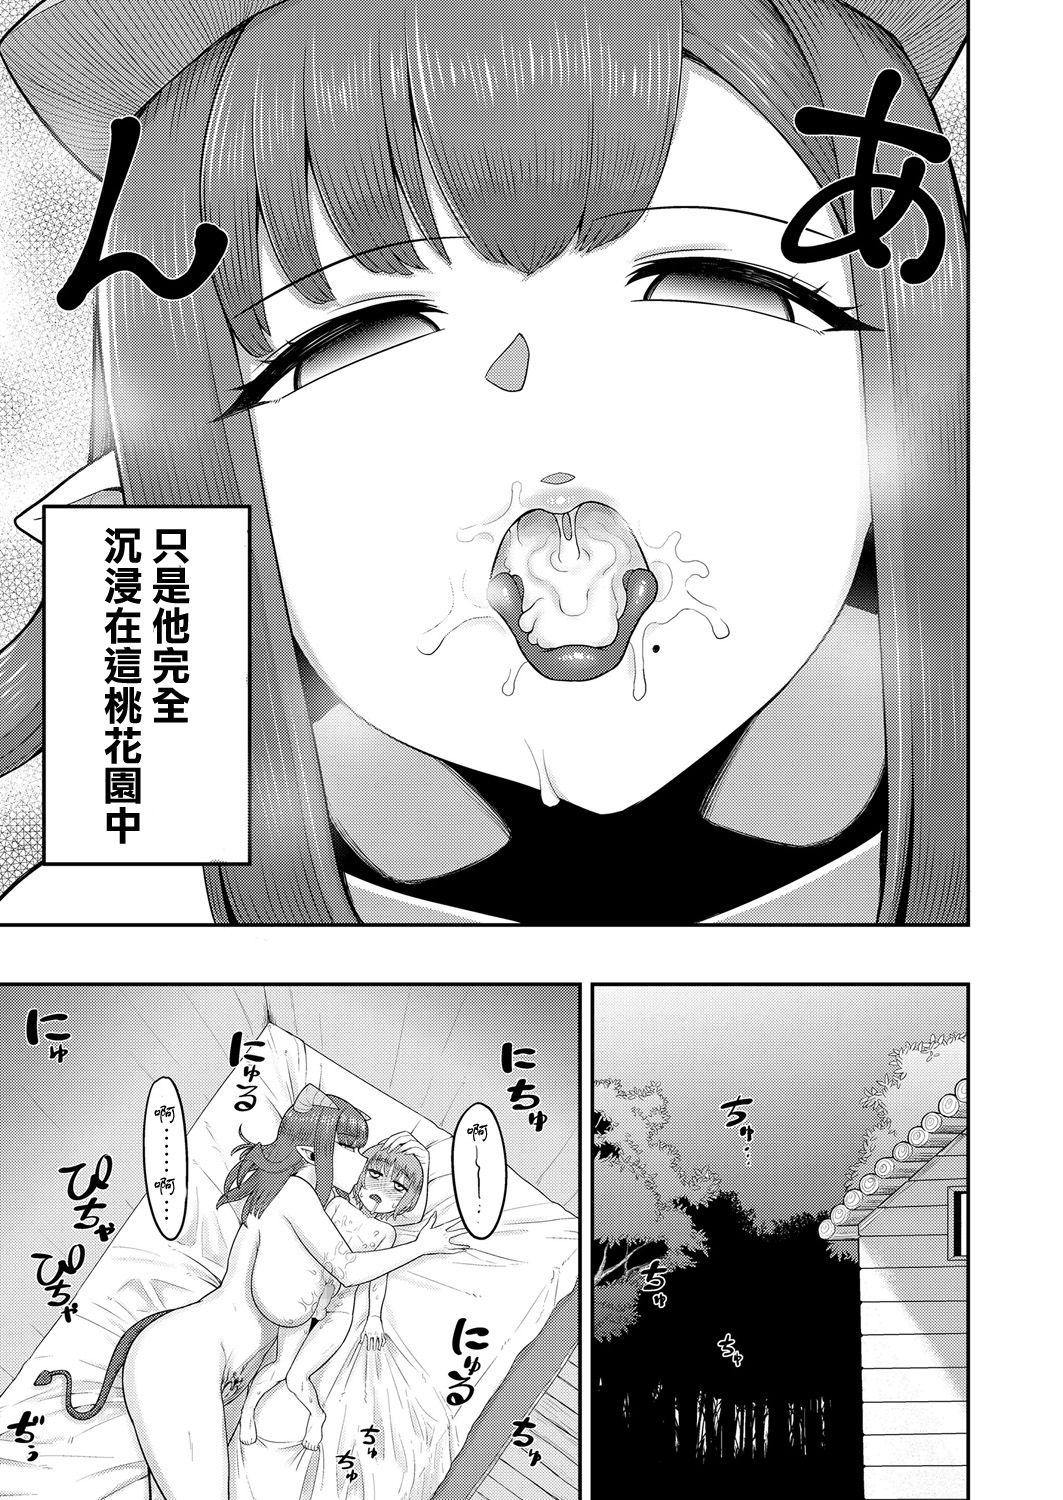 Longhair Imprinting Imp | 印記淫魔 18yearsold - Page 10